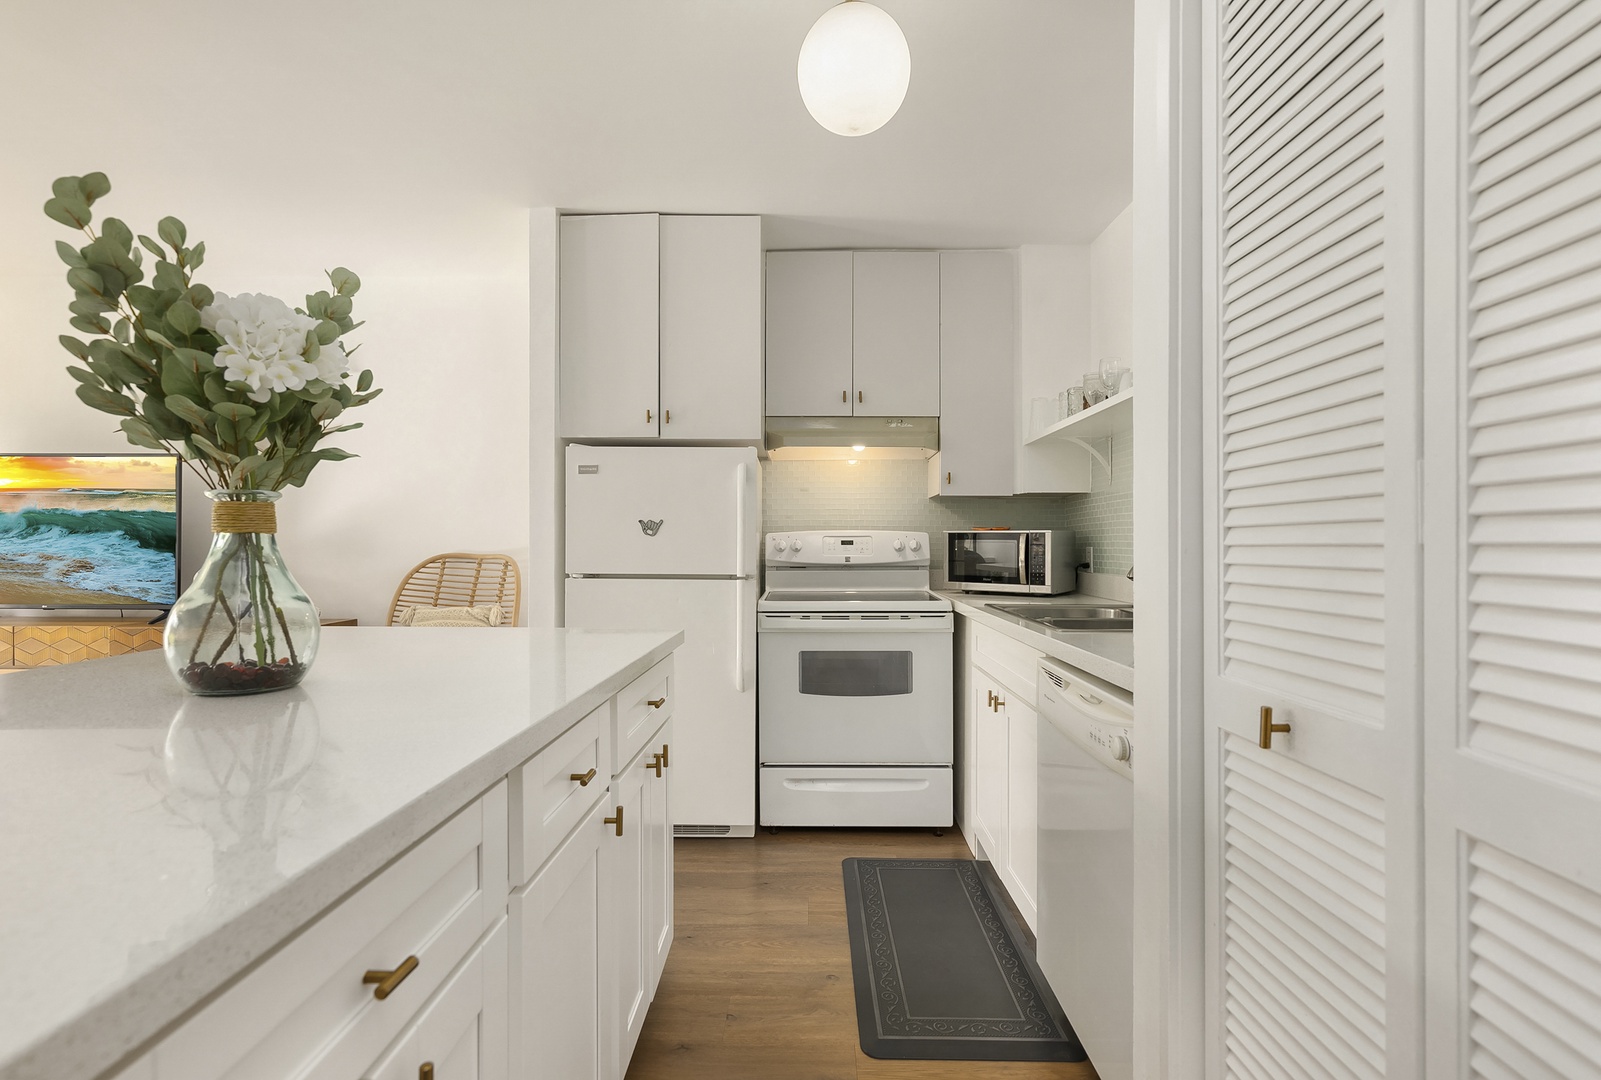 Kahuku Vacation Rentals, Pulelehua Kuilima Estates West #142 - Appliances all in white for a clean, modern look